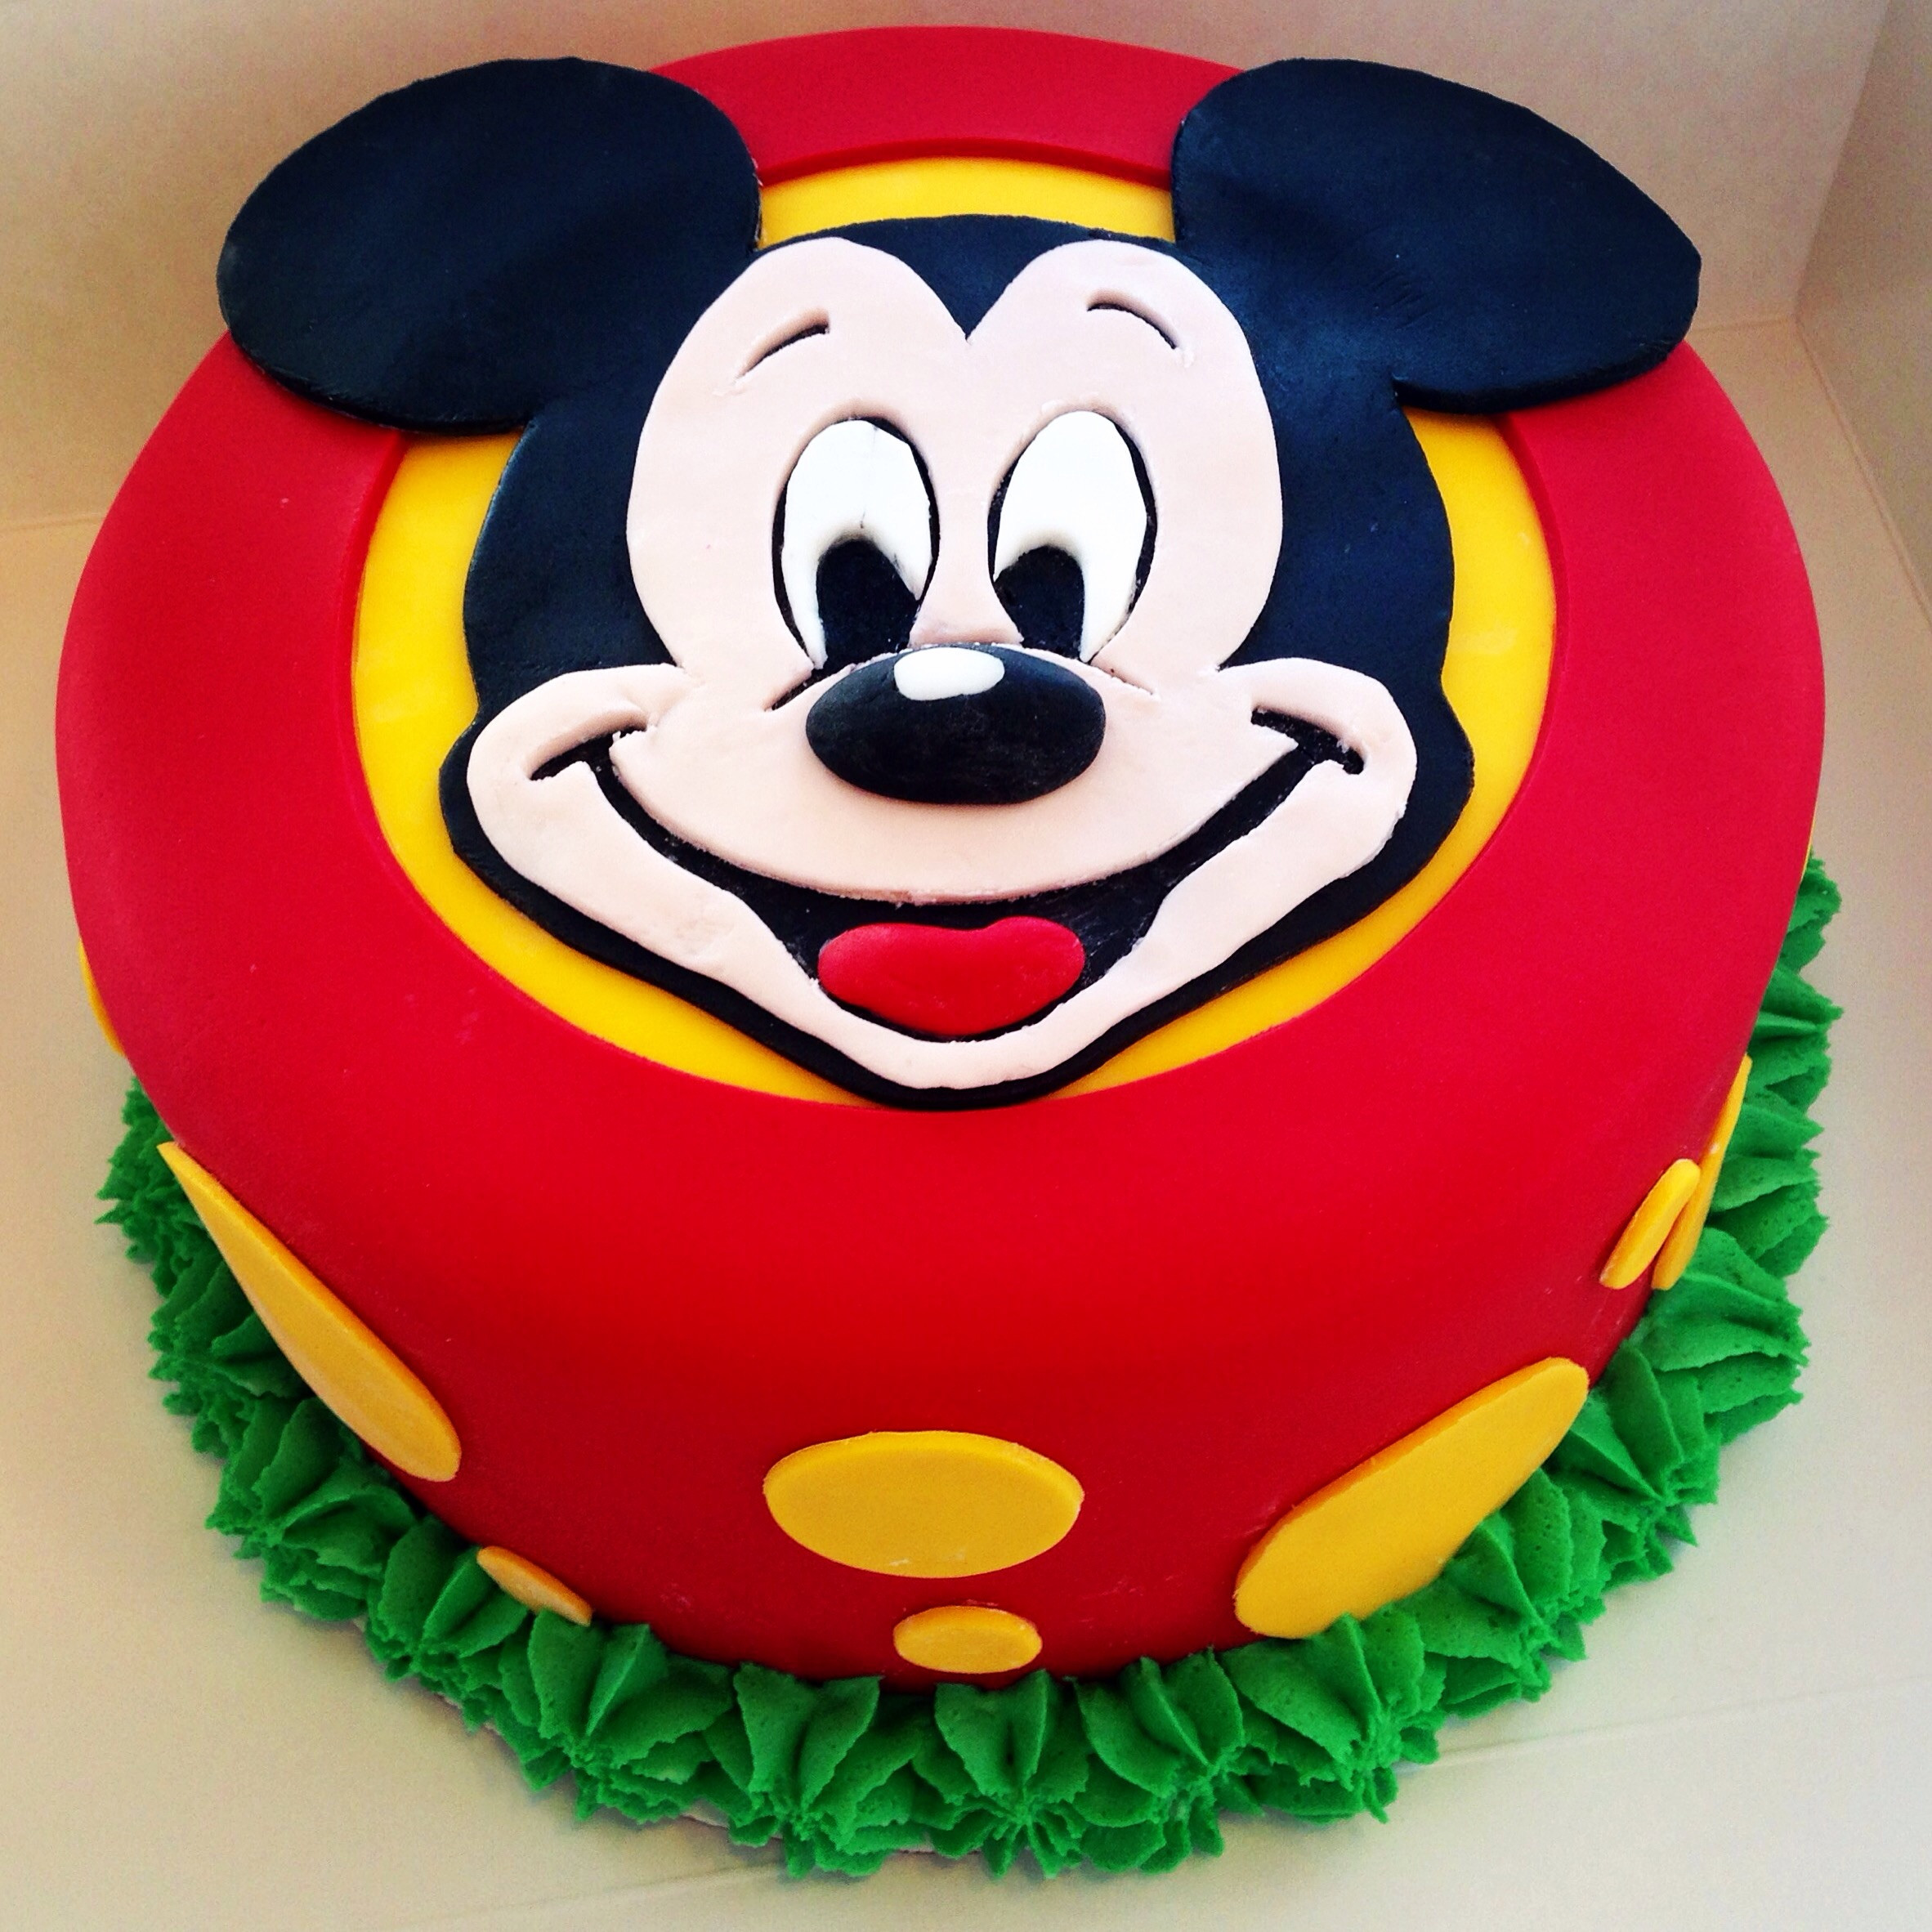 Mickey Mouse Birthday Cakes
 Mickey Mouse Cakes – The Cupcake Delivers